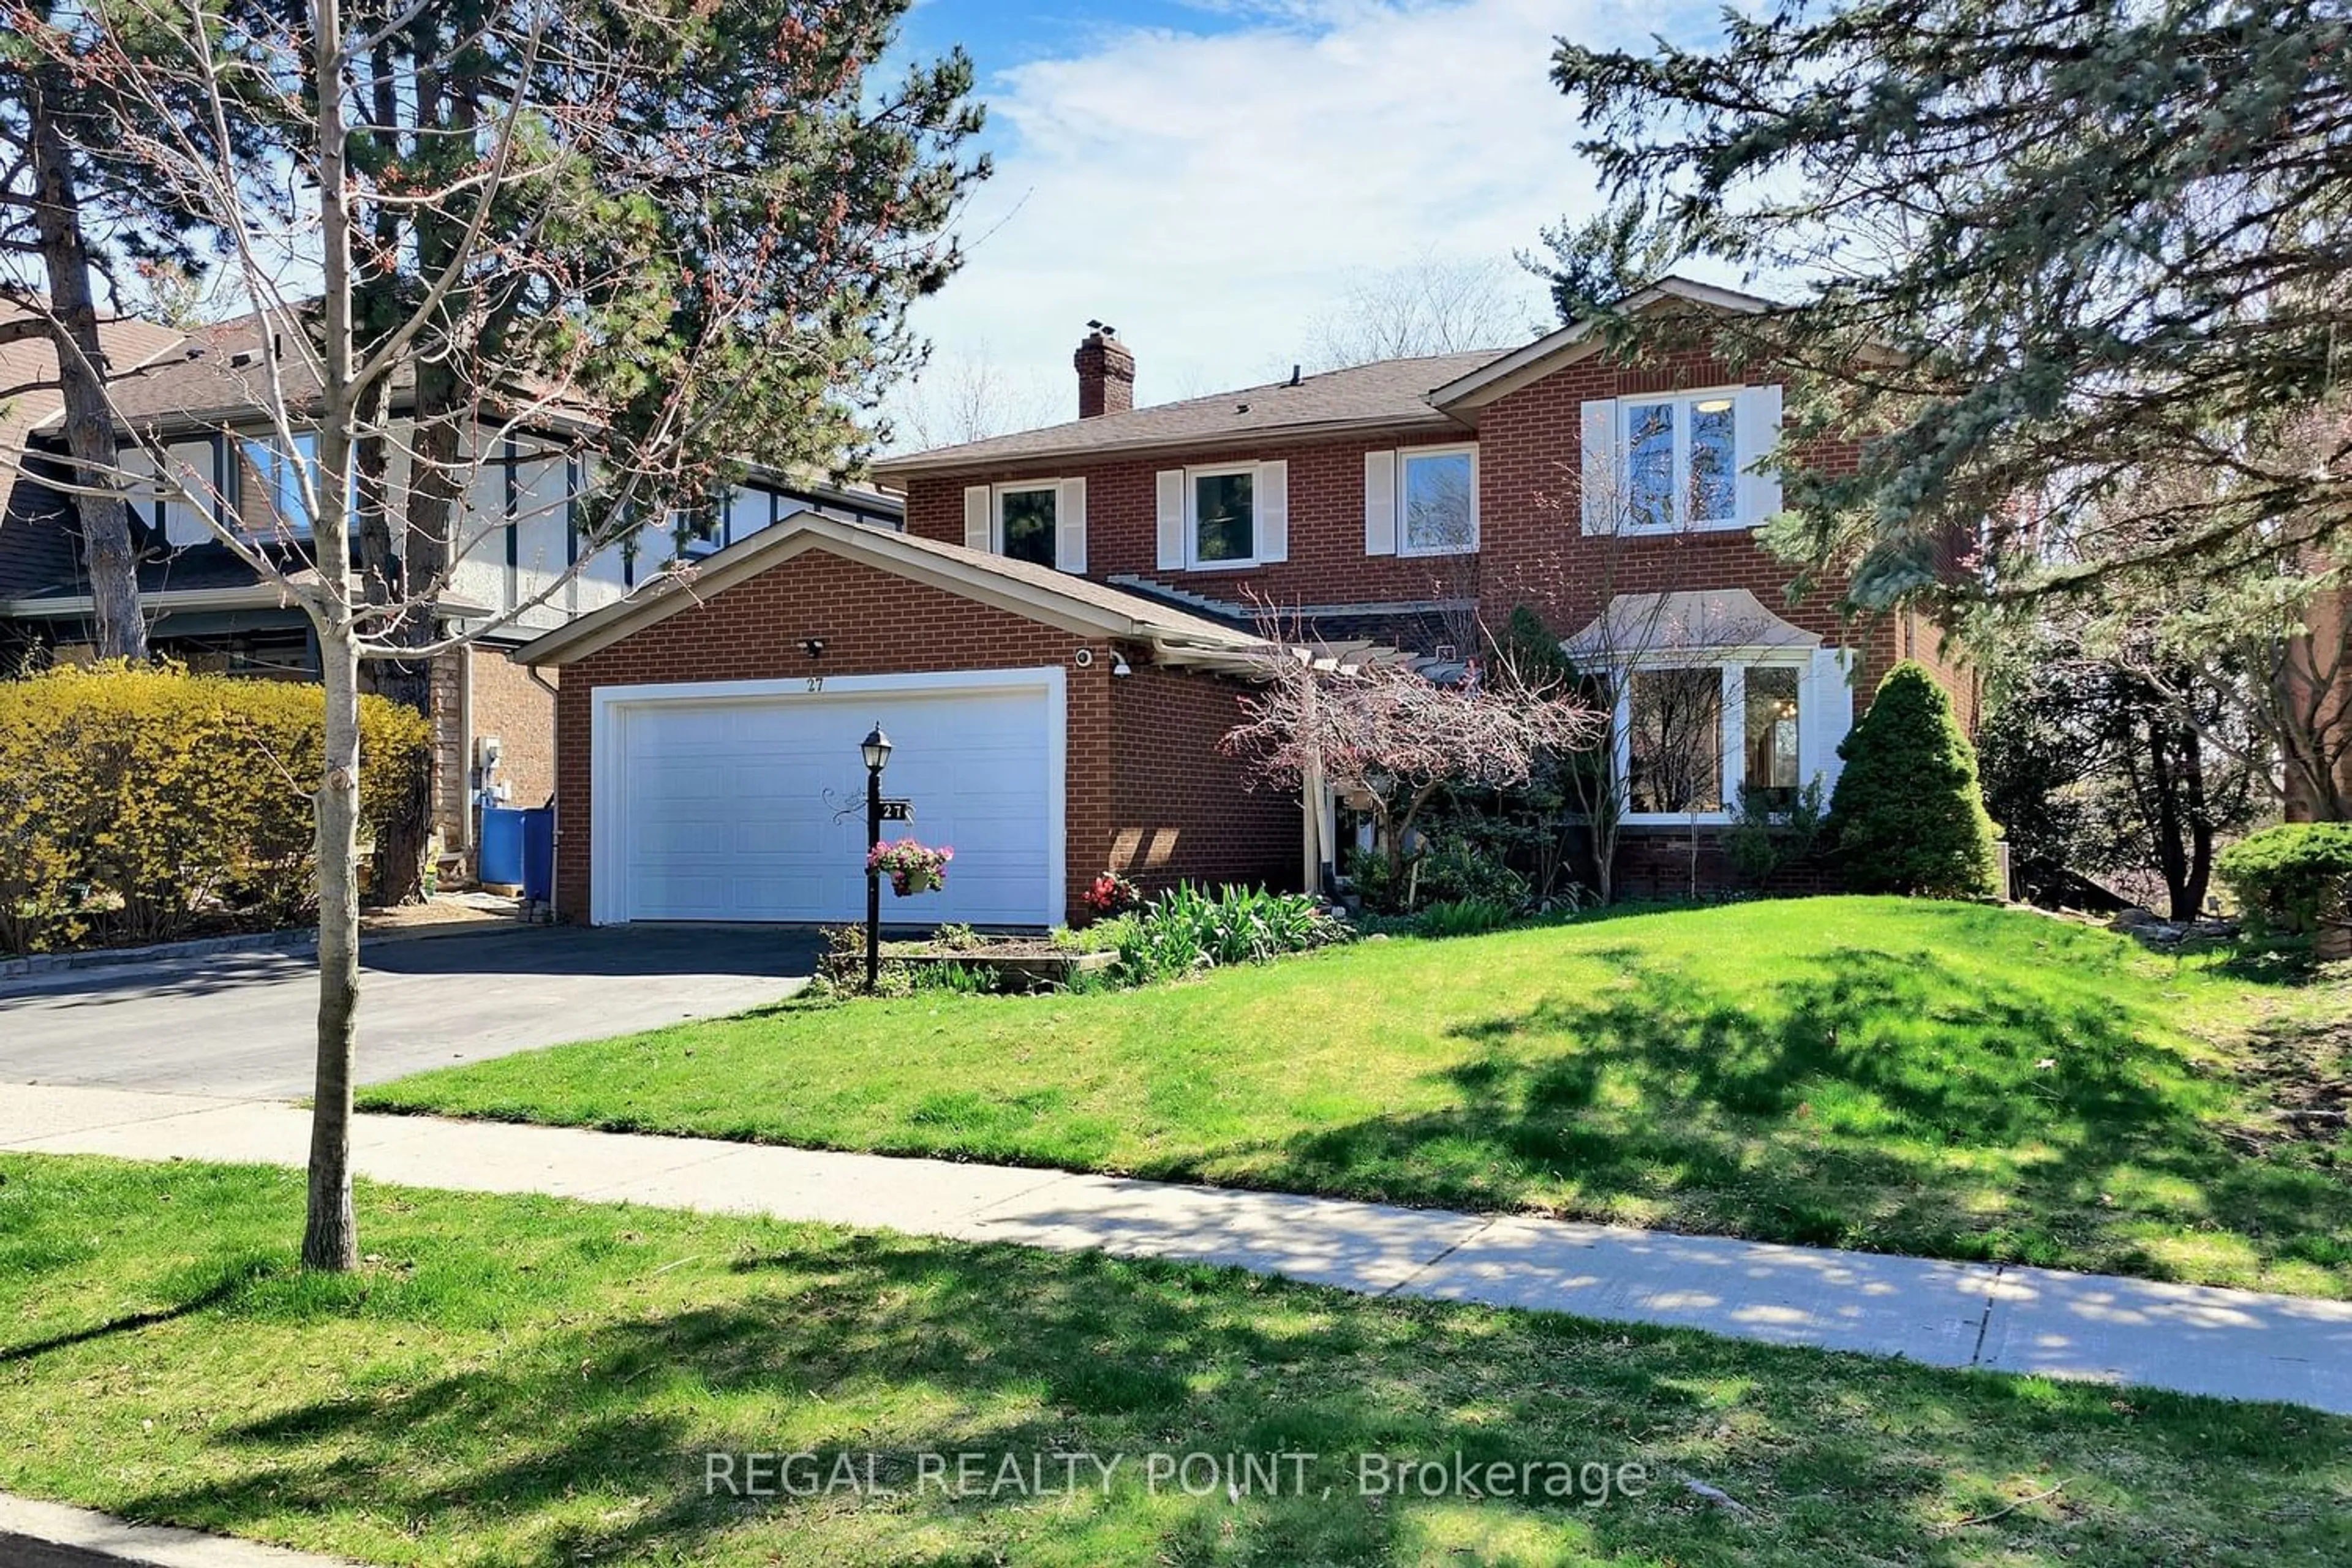 Home with brick exterior material for 27 Bluffwood Dr, Toronto Ontario M2H 3L4